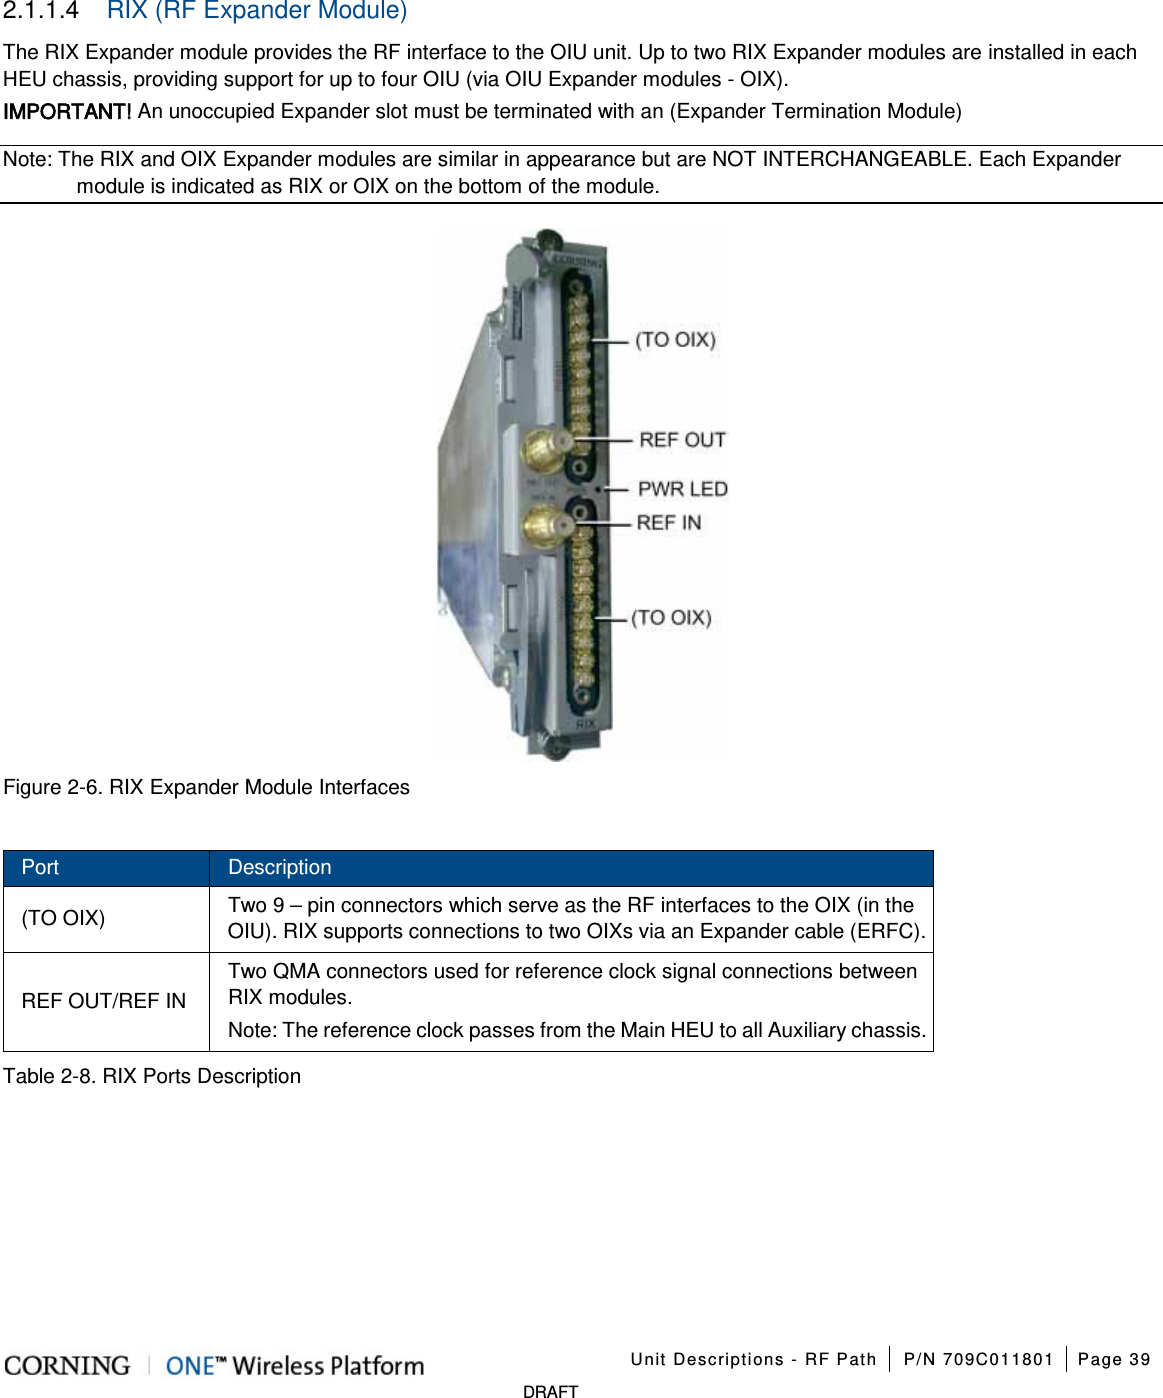    Unit Descriptions - RF Path P/N 709C011801 Page 39   DRAFT 2.1.1.4  RIX (RF Expander Module) The RIX Expander module provides the RF interface to the OIU unit. Up to two RIX Expander modules are installed in each HEU chassis, providing support for up to four OIU (via OIU Expander modules - OIX).   IMPORTANT! An unoccupied Expander slot must be terminated with an (Expander Termination Module) Note: The RIX and OIX Expander modules are similar in appearance but are NOT INTERCHANGEABLE. Each Expander module is indicated as RIX or OIX on the bottom of the module.  Figure  2-6. RIX Expander Module Interfaces   Port Description (TO OIX) Two 9 – pin connectors which serve as the RF interfaces to the OIX (in the OIU). RIX supports connections to two OIXs via an Expander cable (ERFC). REF OUT/REF IN Two QMA connectors used for reference clock signal connections between RIX modules.   Note: The reference clock passes from the Main HEU to all Auxiliary chassis.  Table  2-8. RIX Ports Description    